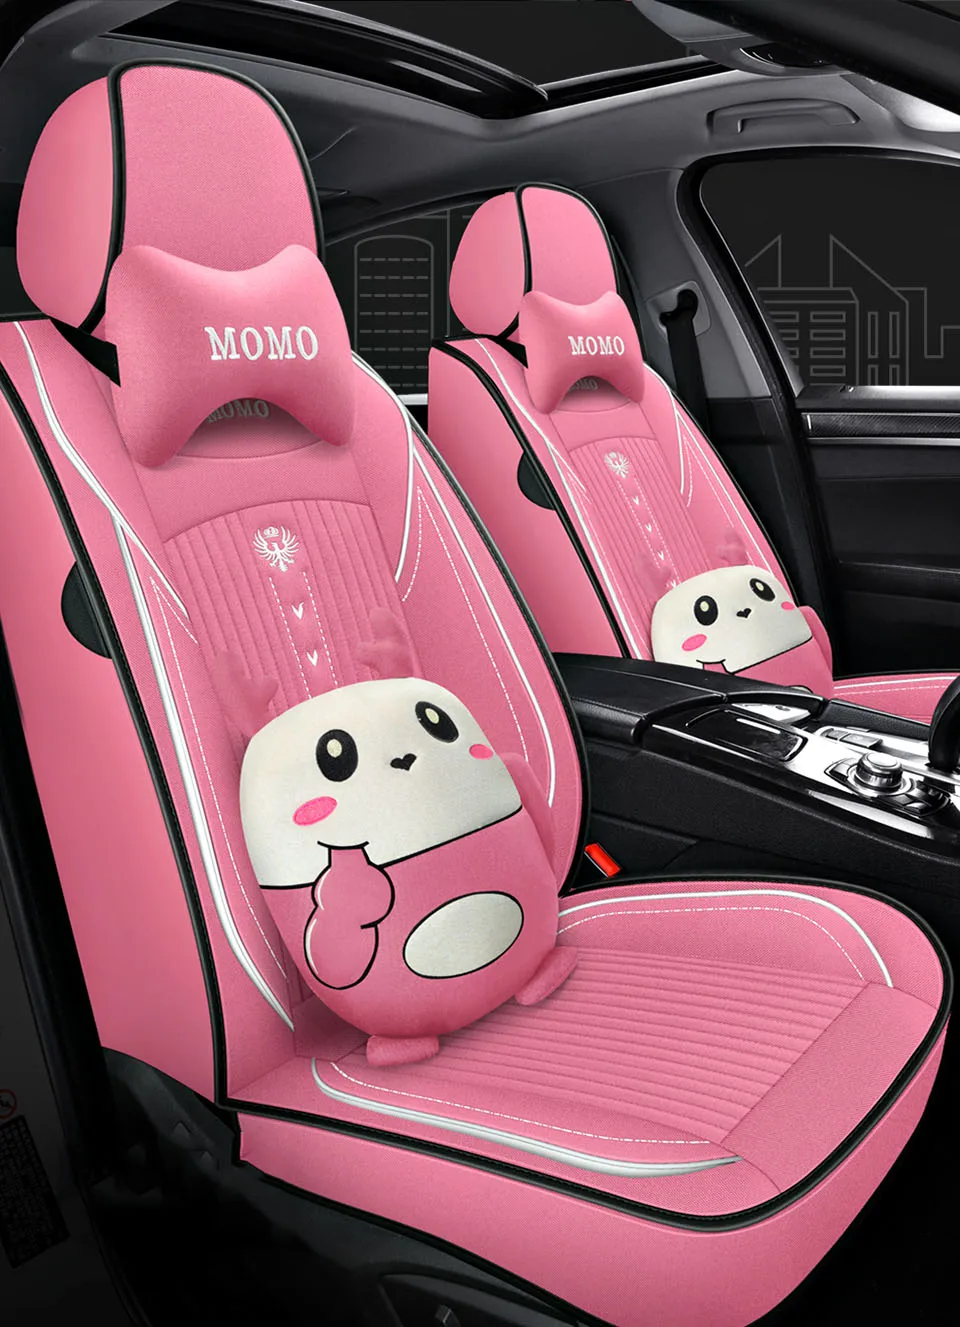 

Four Seasons Car Universal Seat Cover for BYD F0 F3 F3R G3 G3R L3 F6 G6S6 E6 E6 M6 SURUI SIRUI CUSTOM Auto Parts